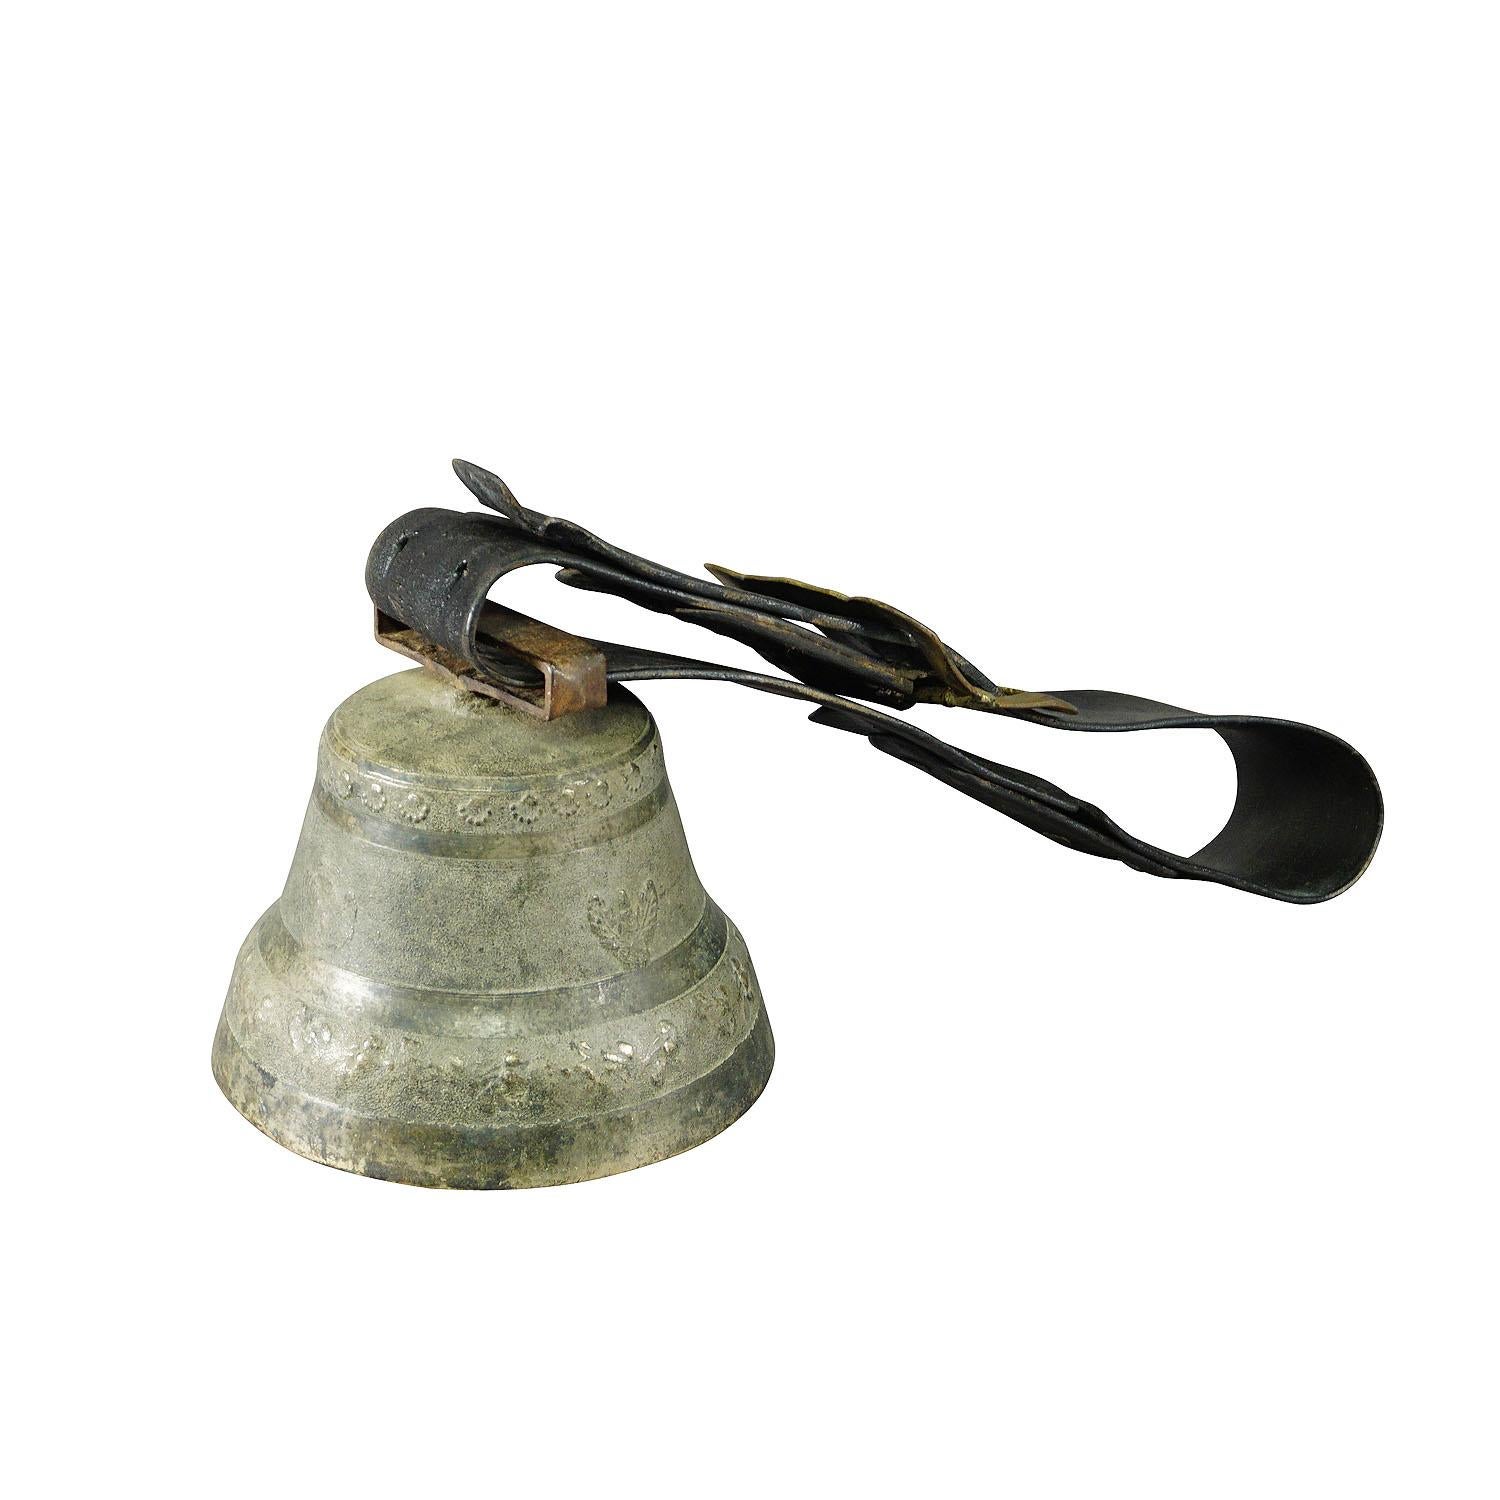 A large and heavy casted bronze cow bell manufactured in Switzerland around 1930. The antique bell features high relief motifs of farm animals, human heads and foliages. The bell comes with its original brown leather strap with buckle. Bells like